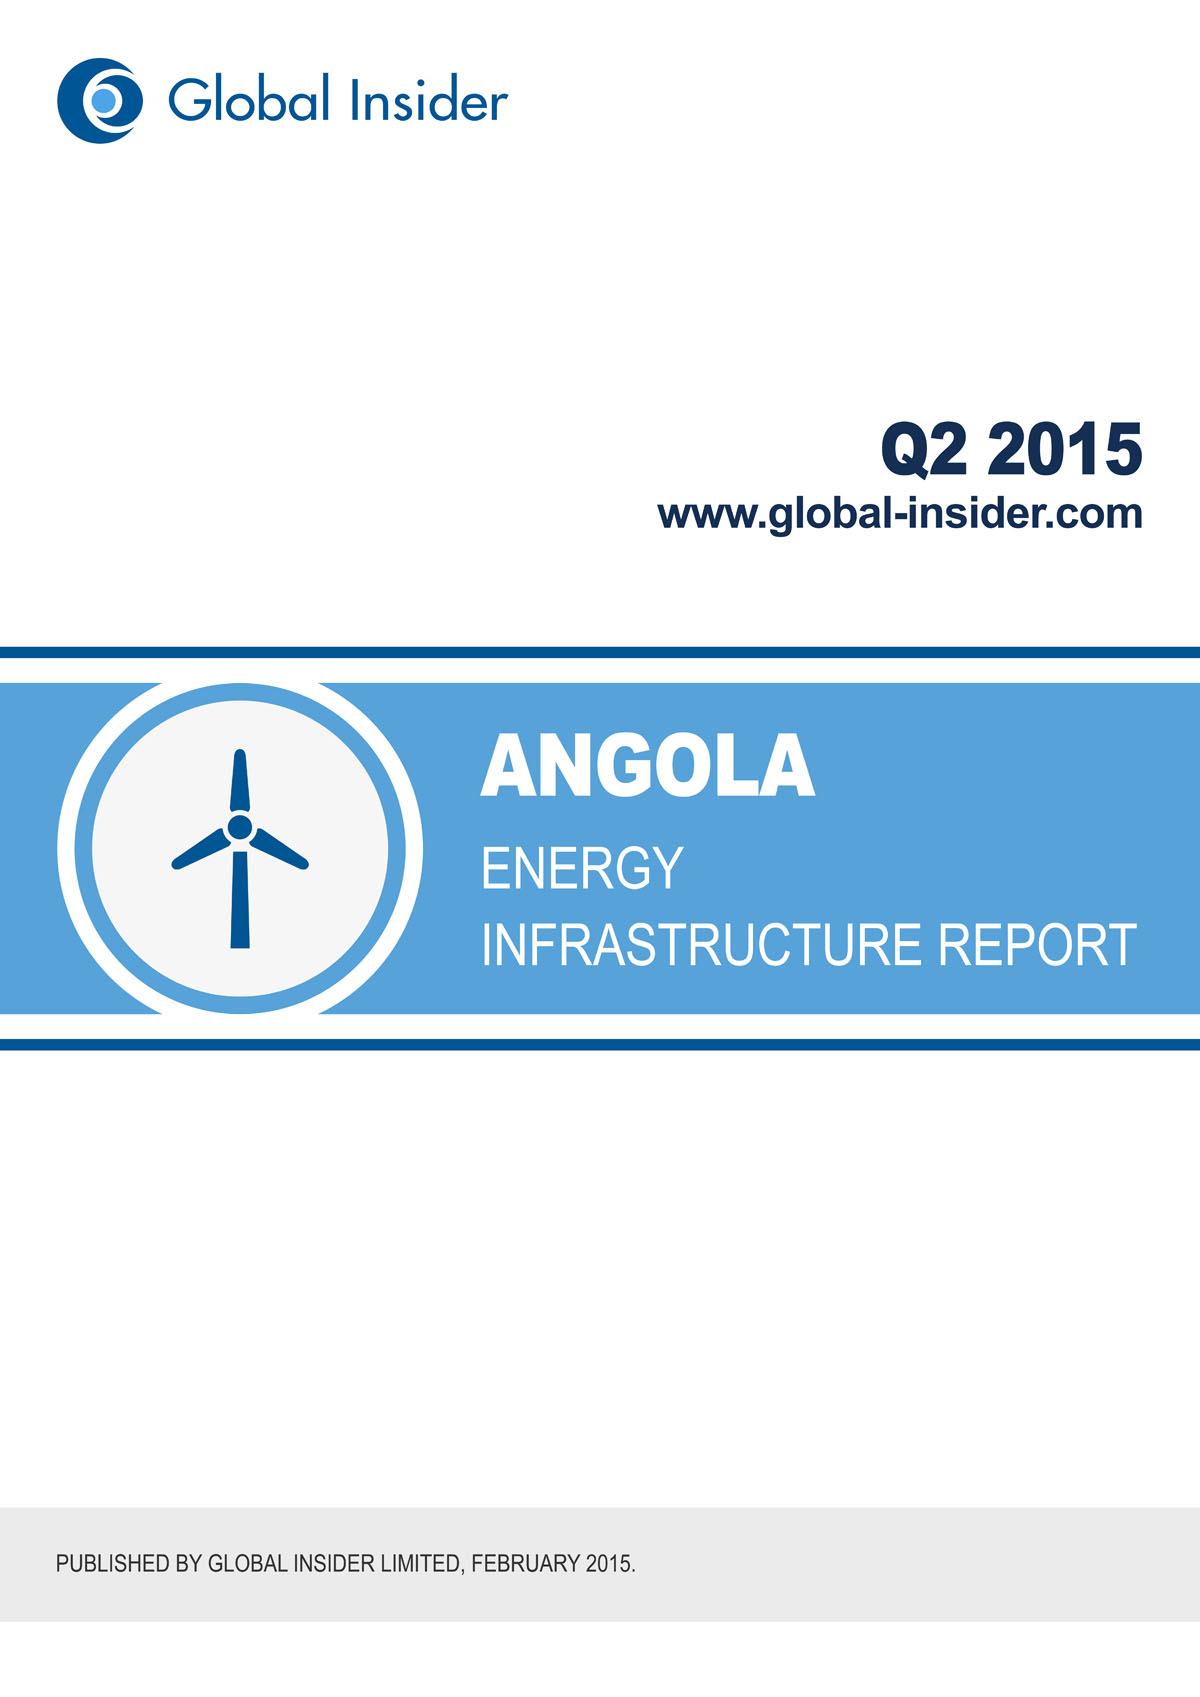 Angola Energy Infrastructure Report